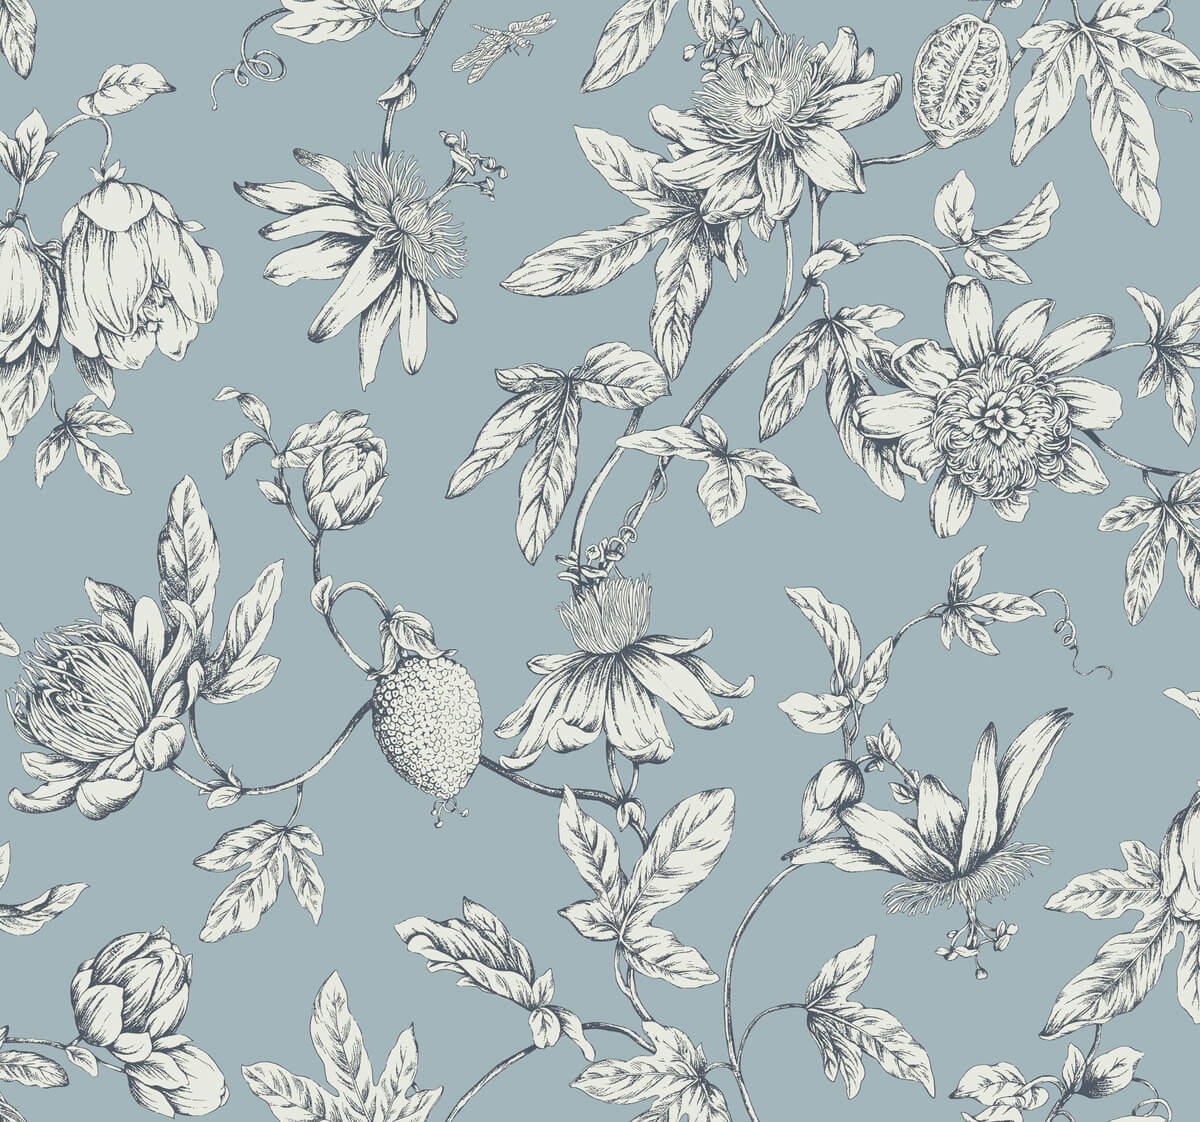 Toile Resource Library Passion Flower Toile Wallpaper - Blue